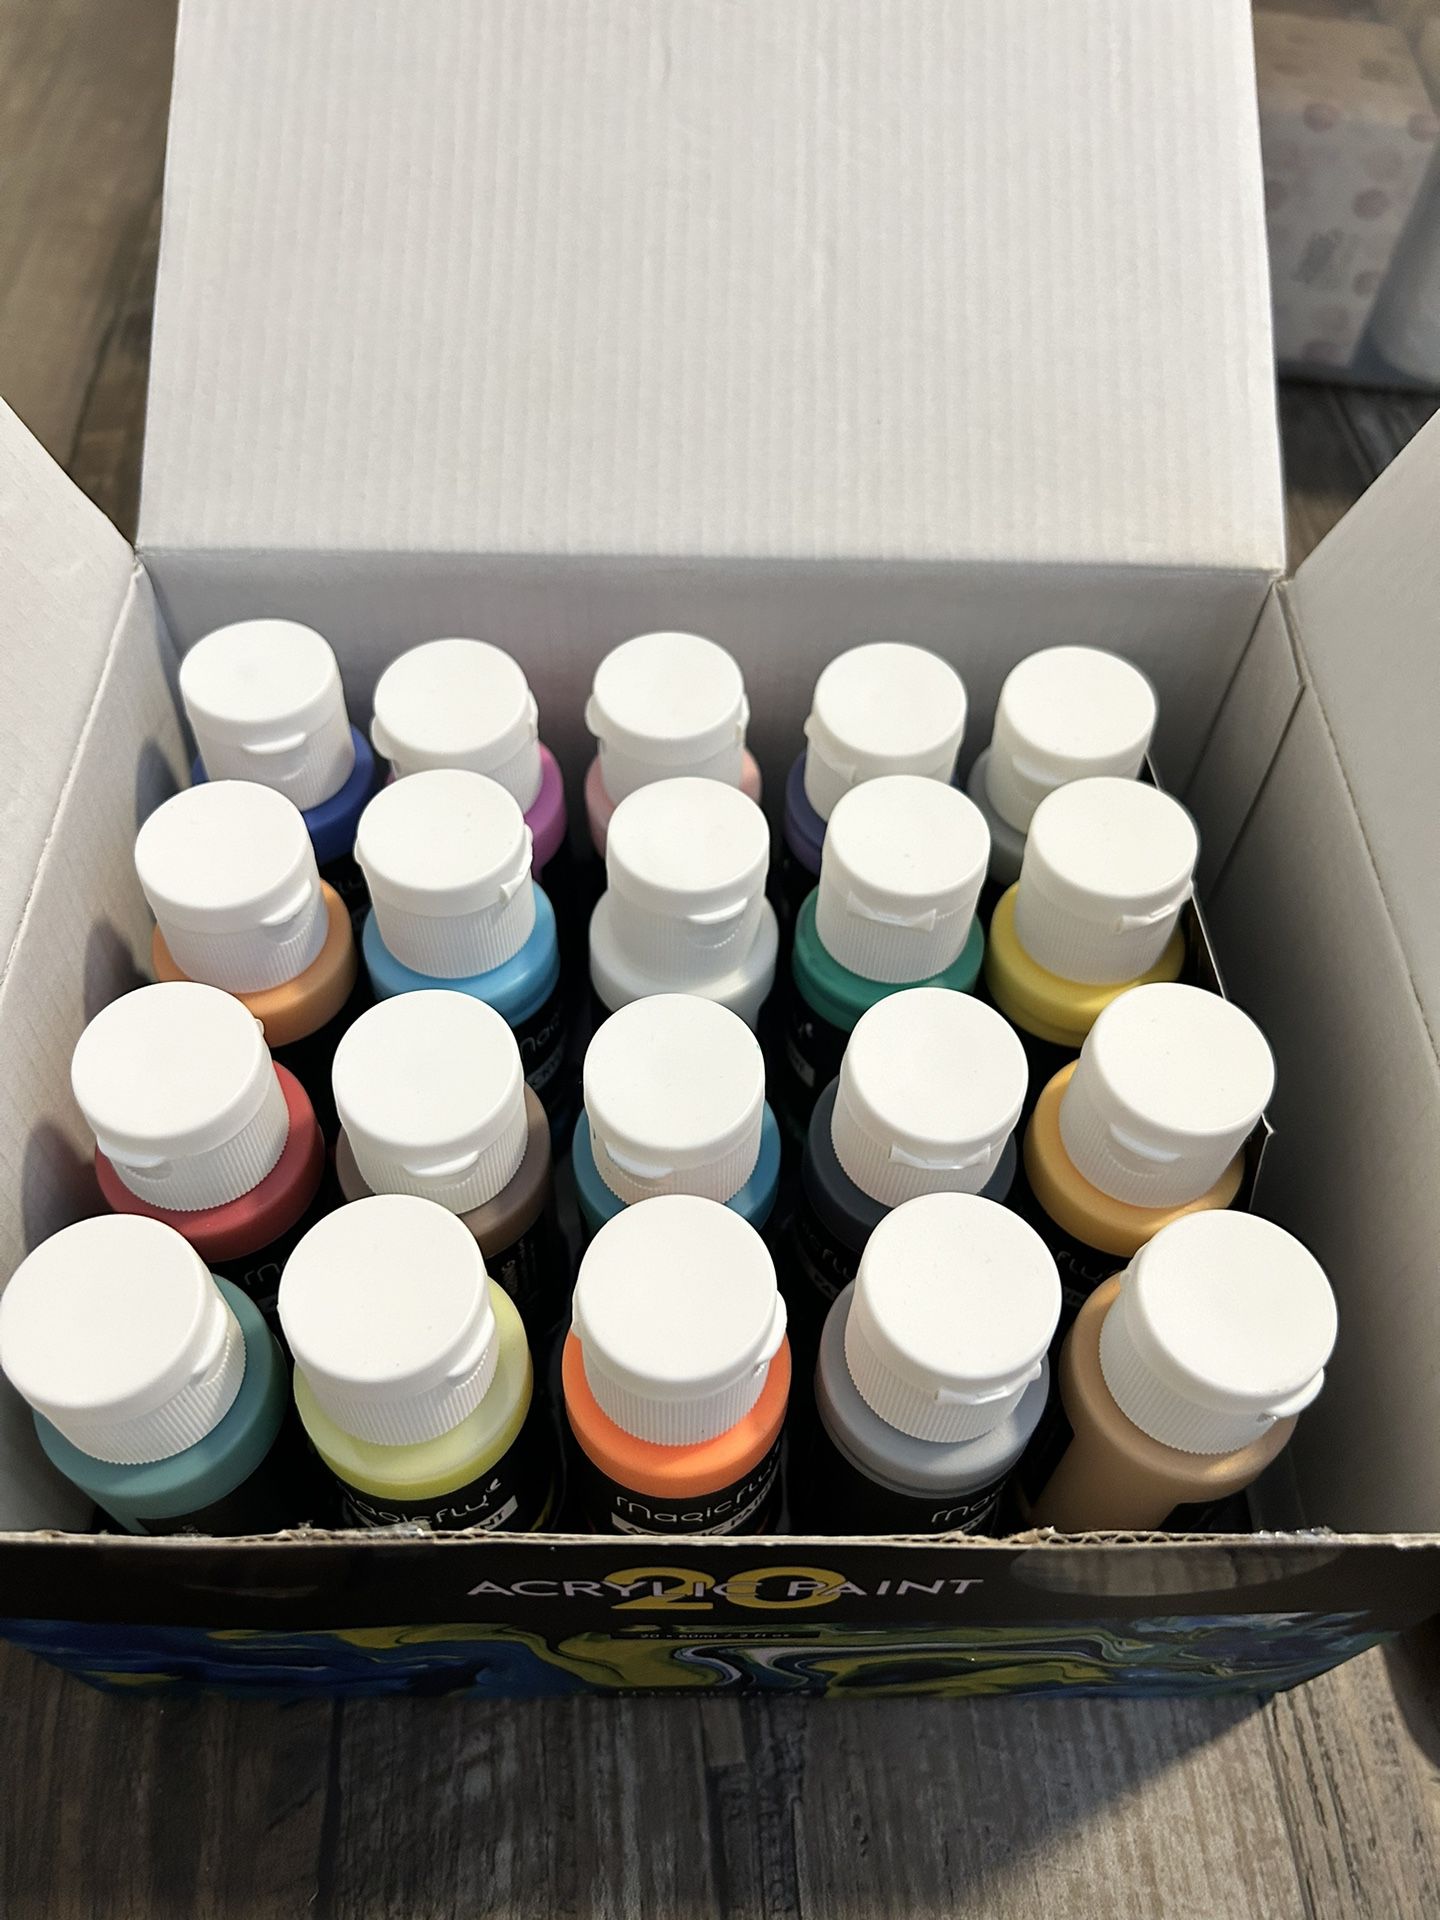 Acrylic Paint Set, Brushes, Canvases, And Portable Easel